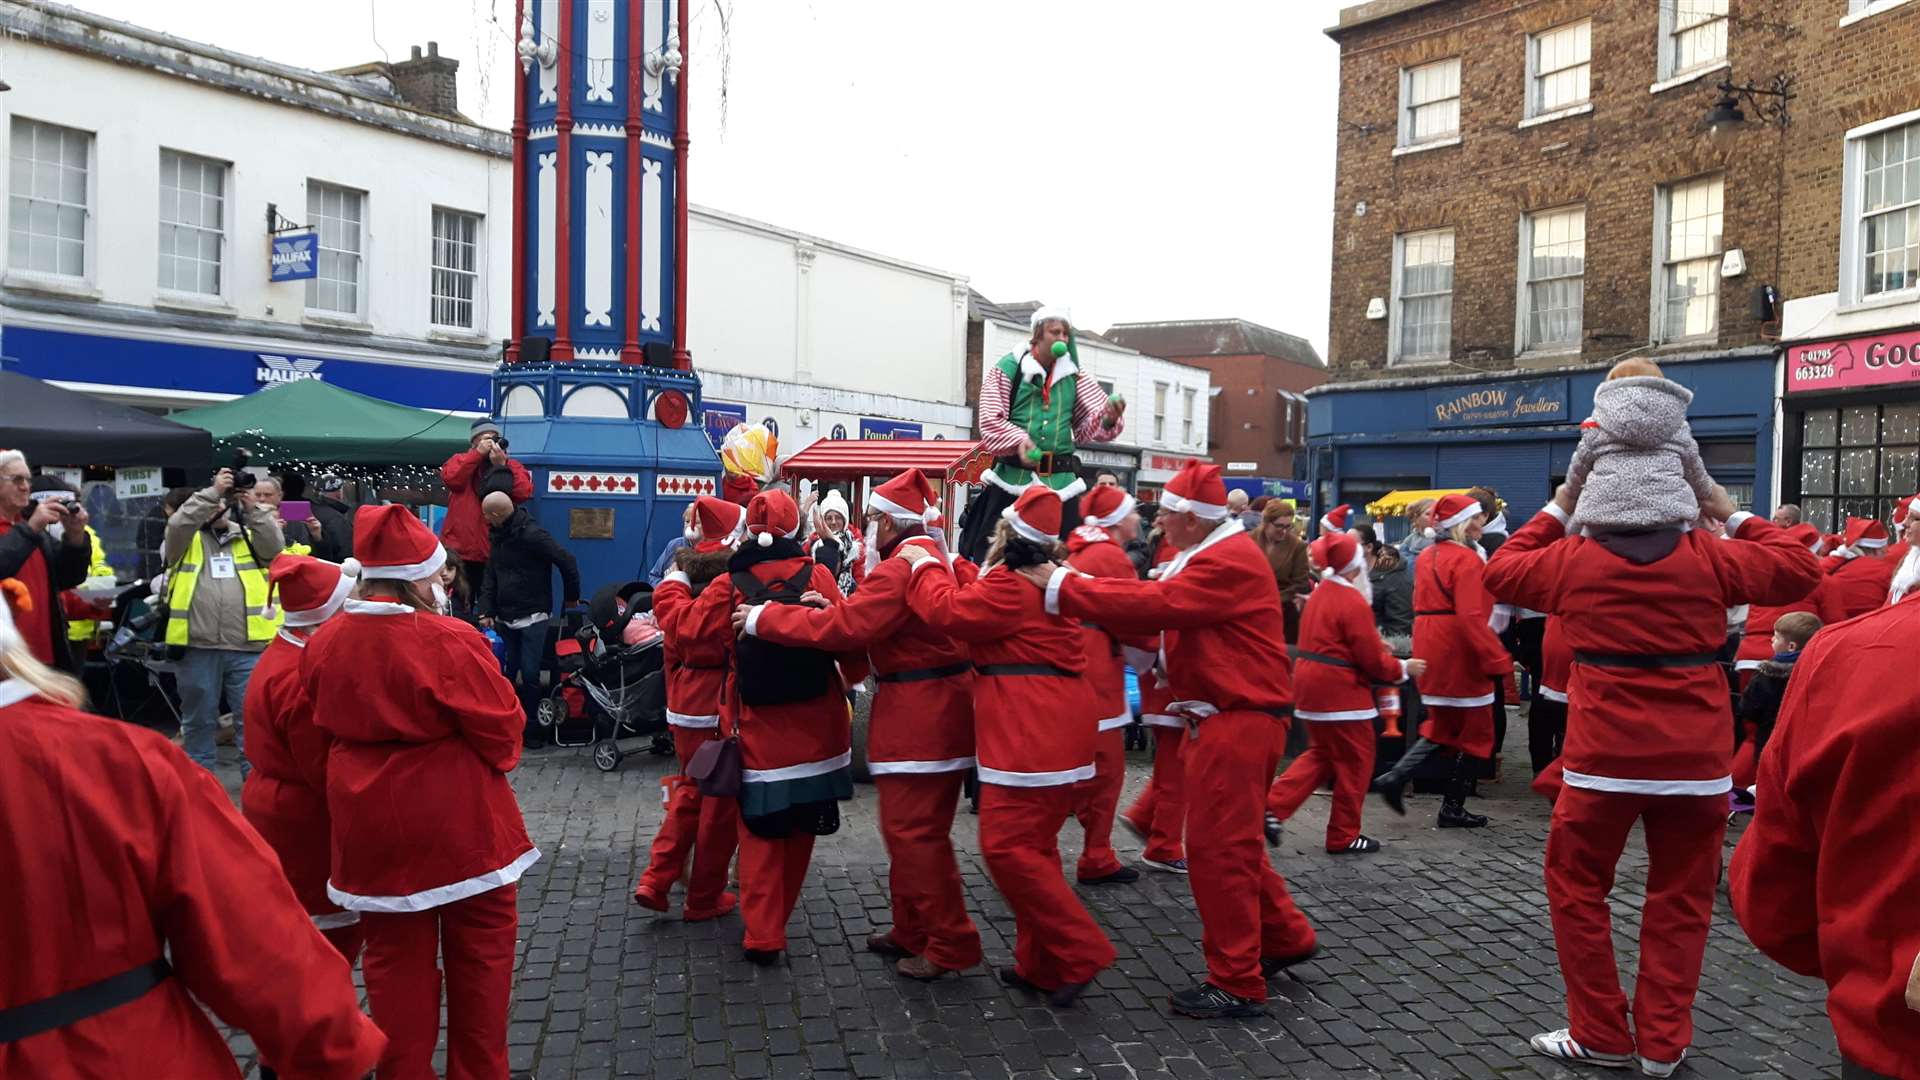 Rotary Club Santas will be holding a Christmas Conga around the clock tower at the Sheerness lights switch-on at 3pm this Saturday (22863682)